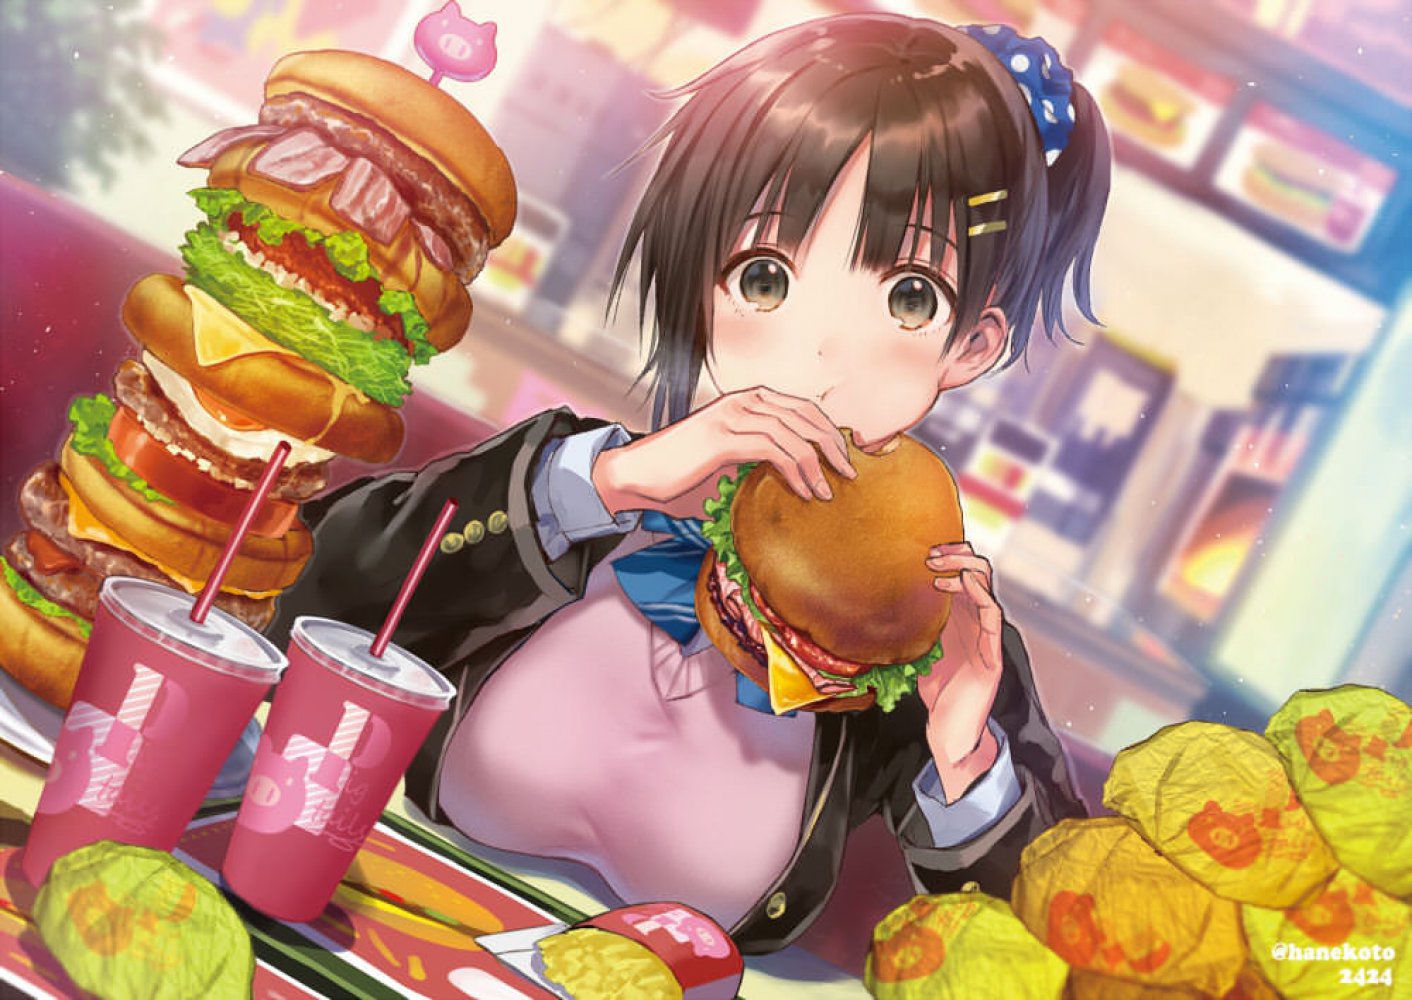 Secondary: Images of girls eating and drinking 6